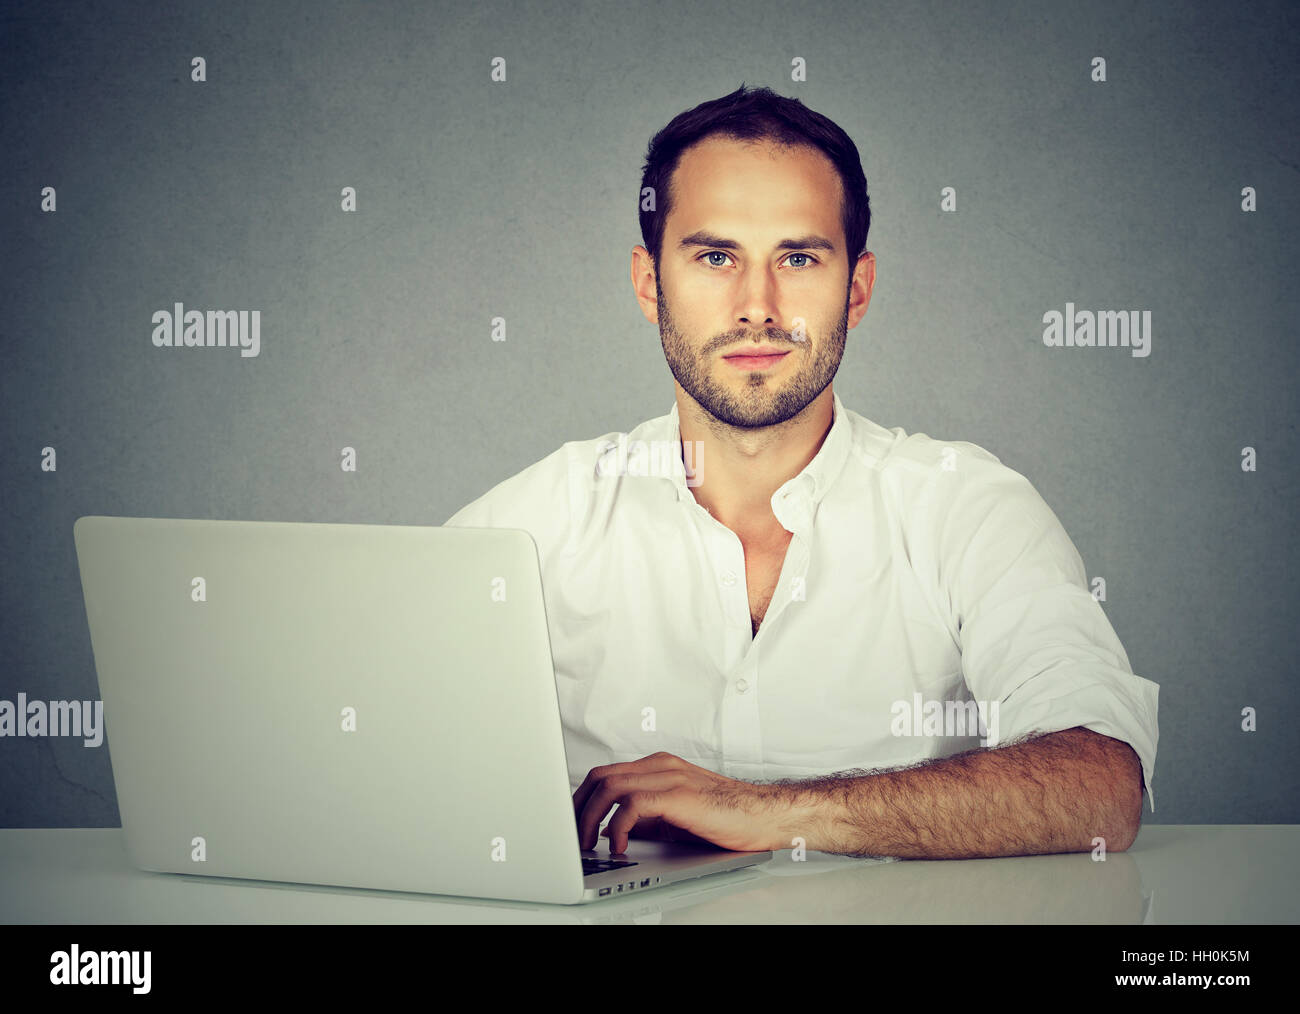 Smiling young business man using a laptop Stock Photo